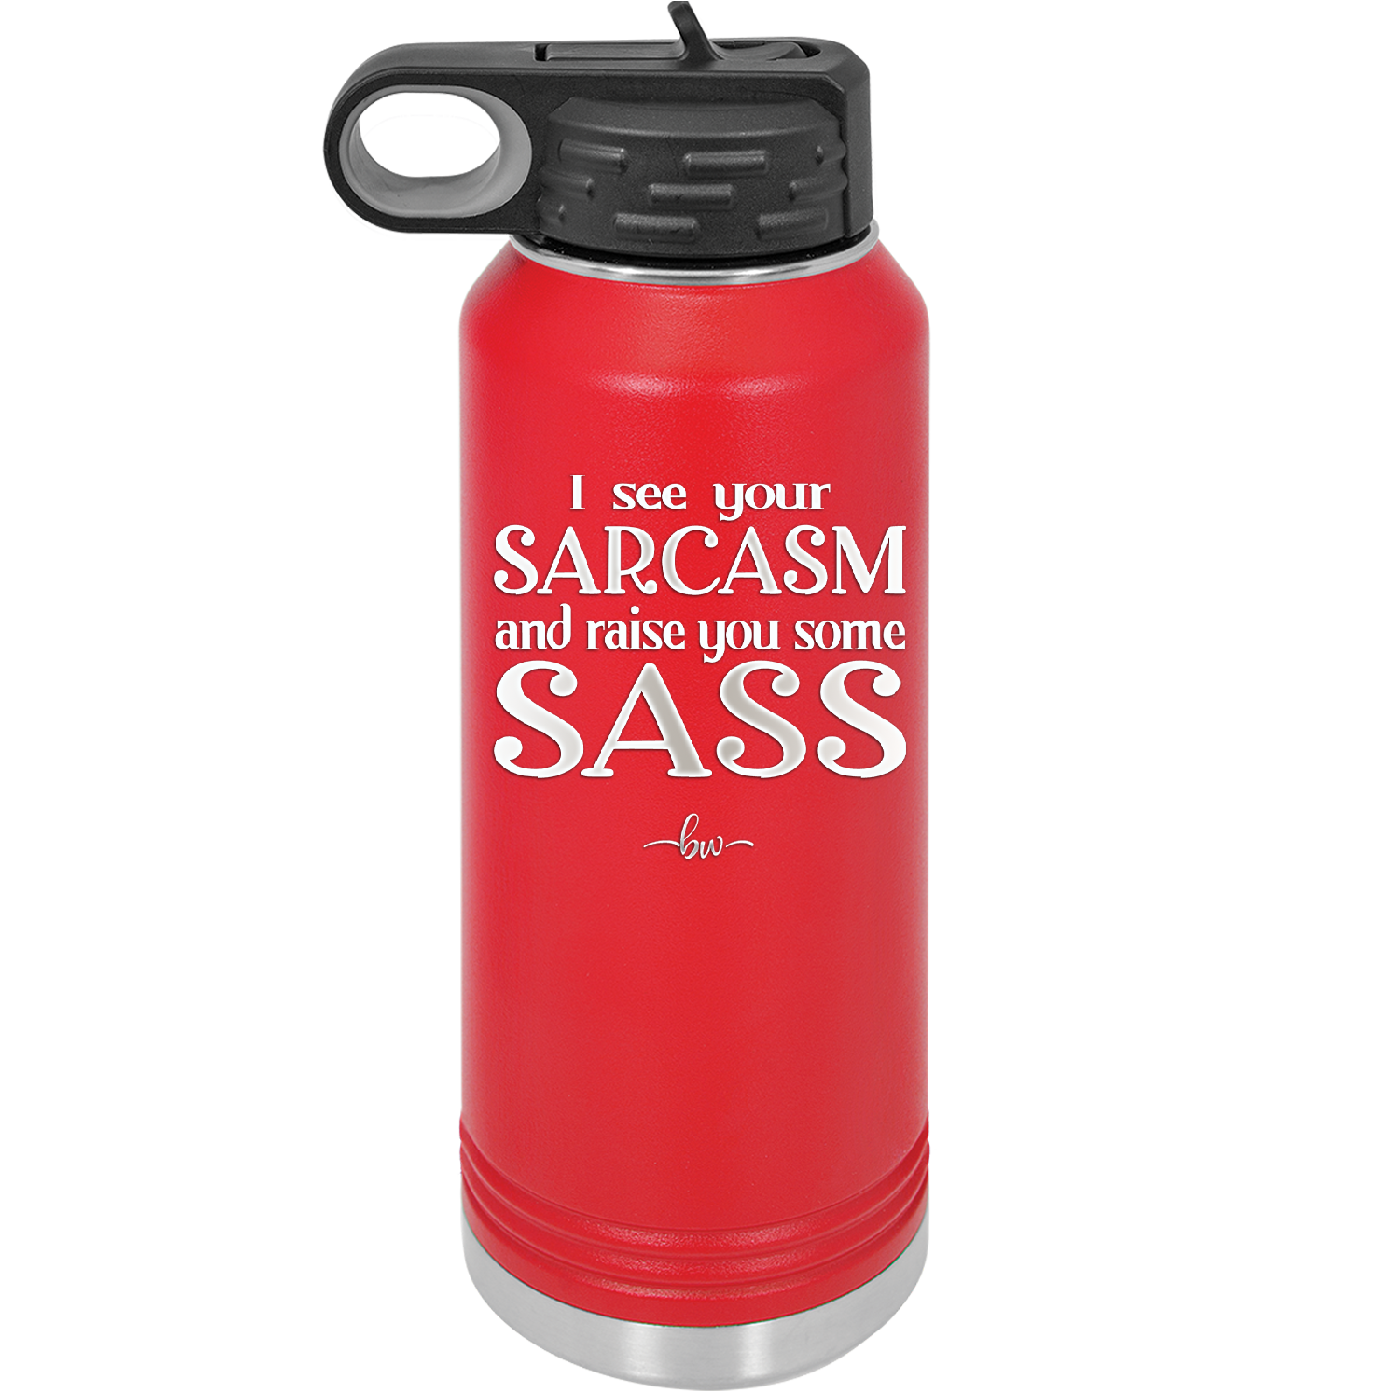 I See Your Sarcasm and Raise You Some Sass - Laser Engraved Stainless Steel Drinkware - 2227 -